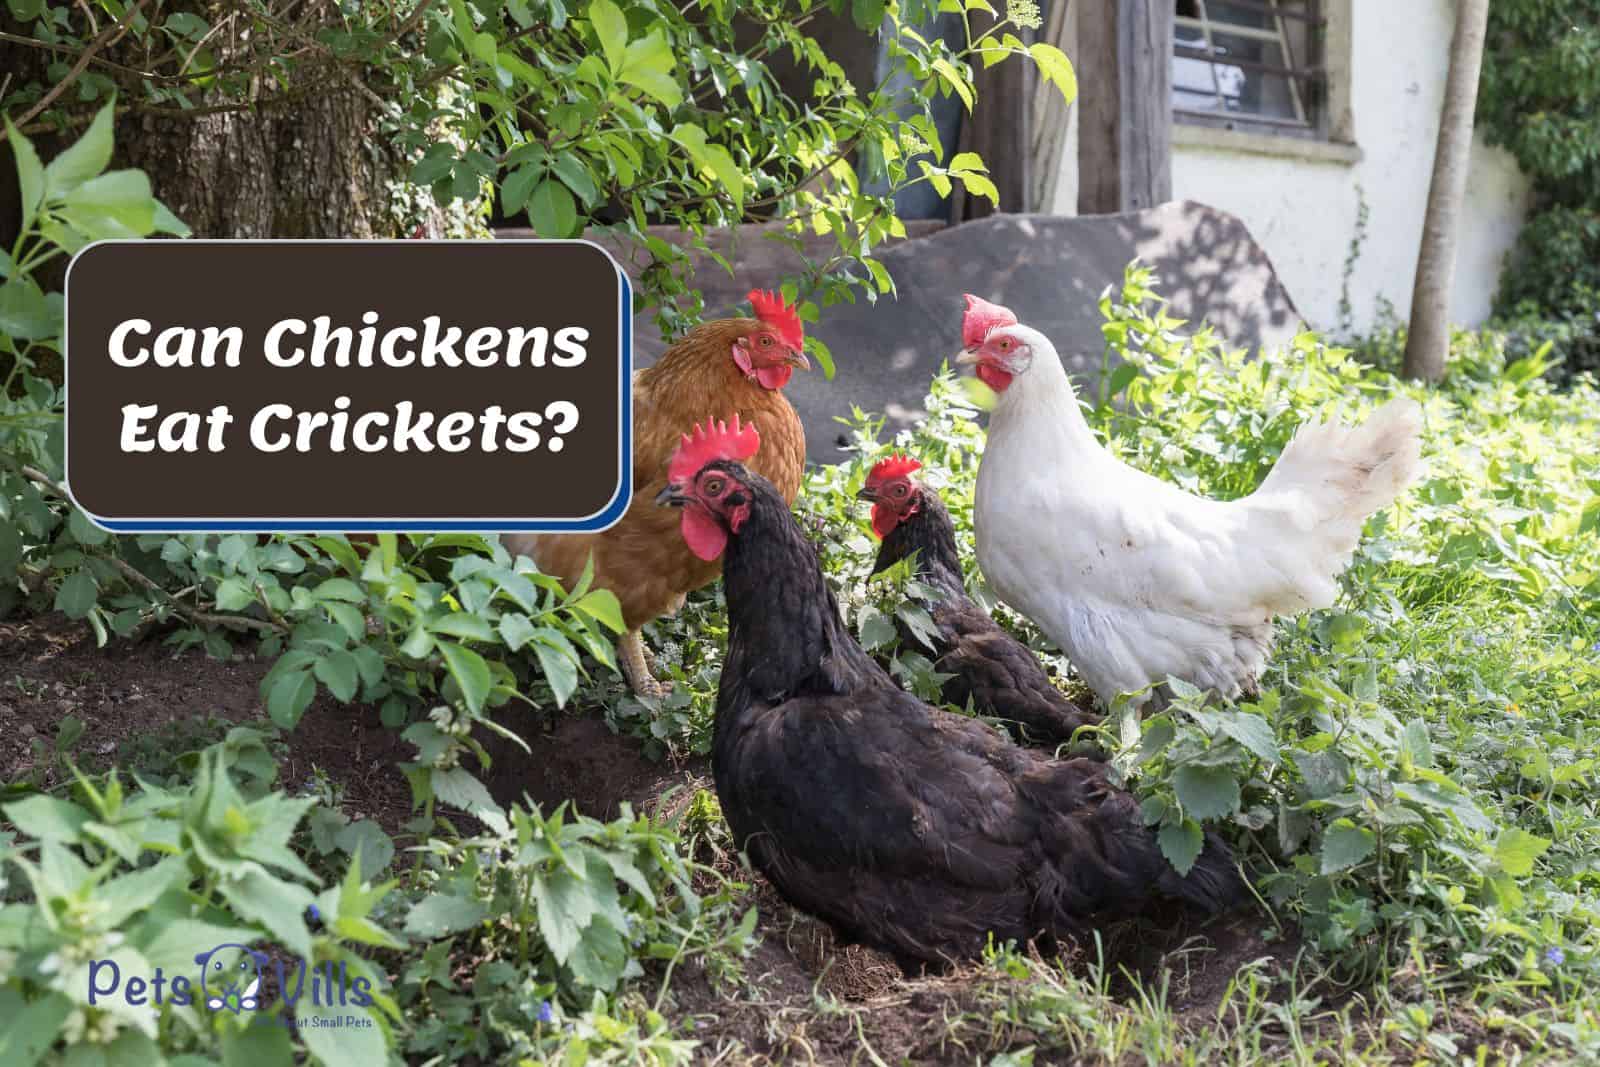 chickens in the garden with plenty of herbs but can chickens eat crickets there?